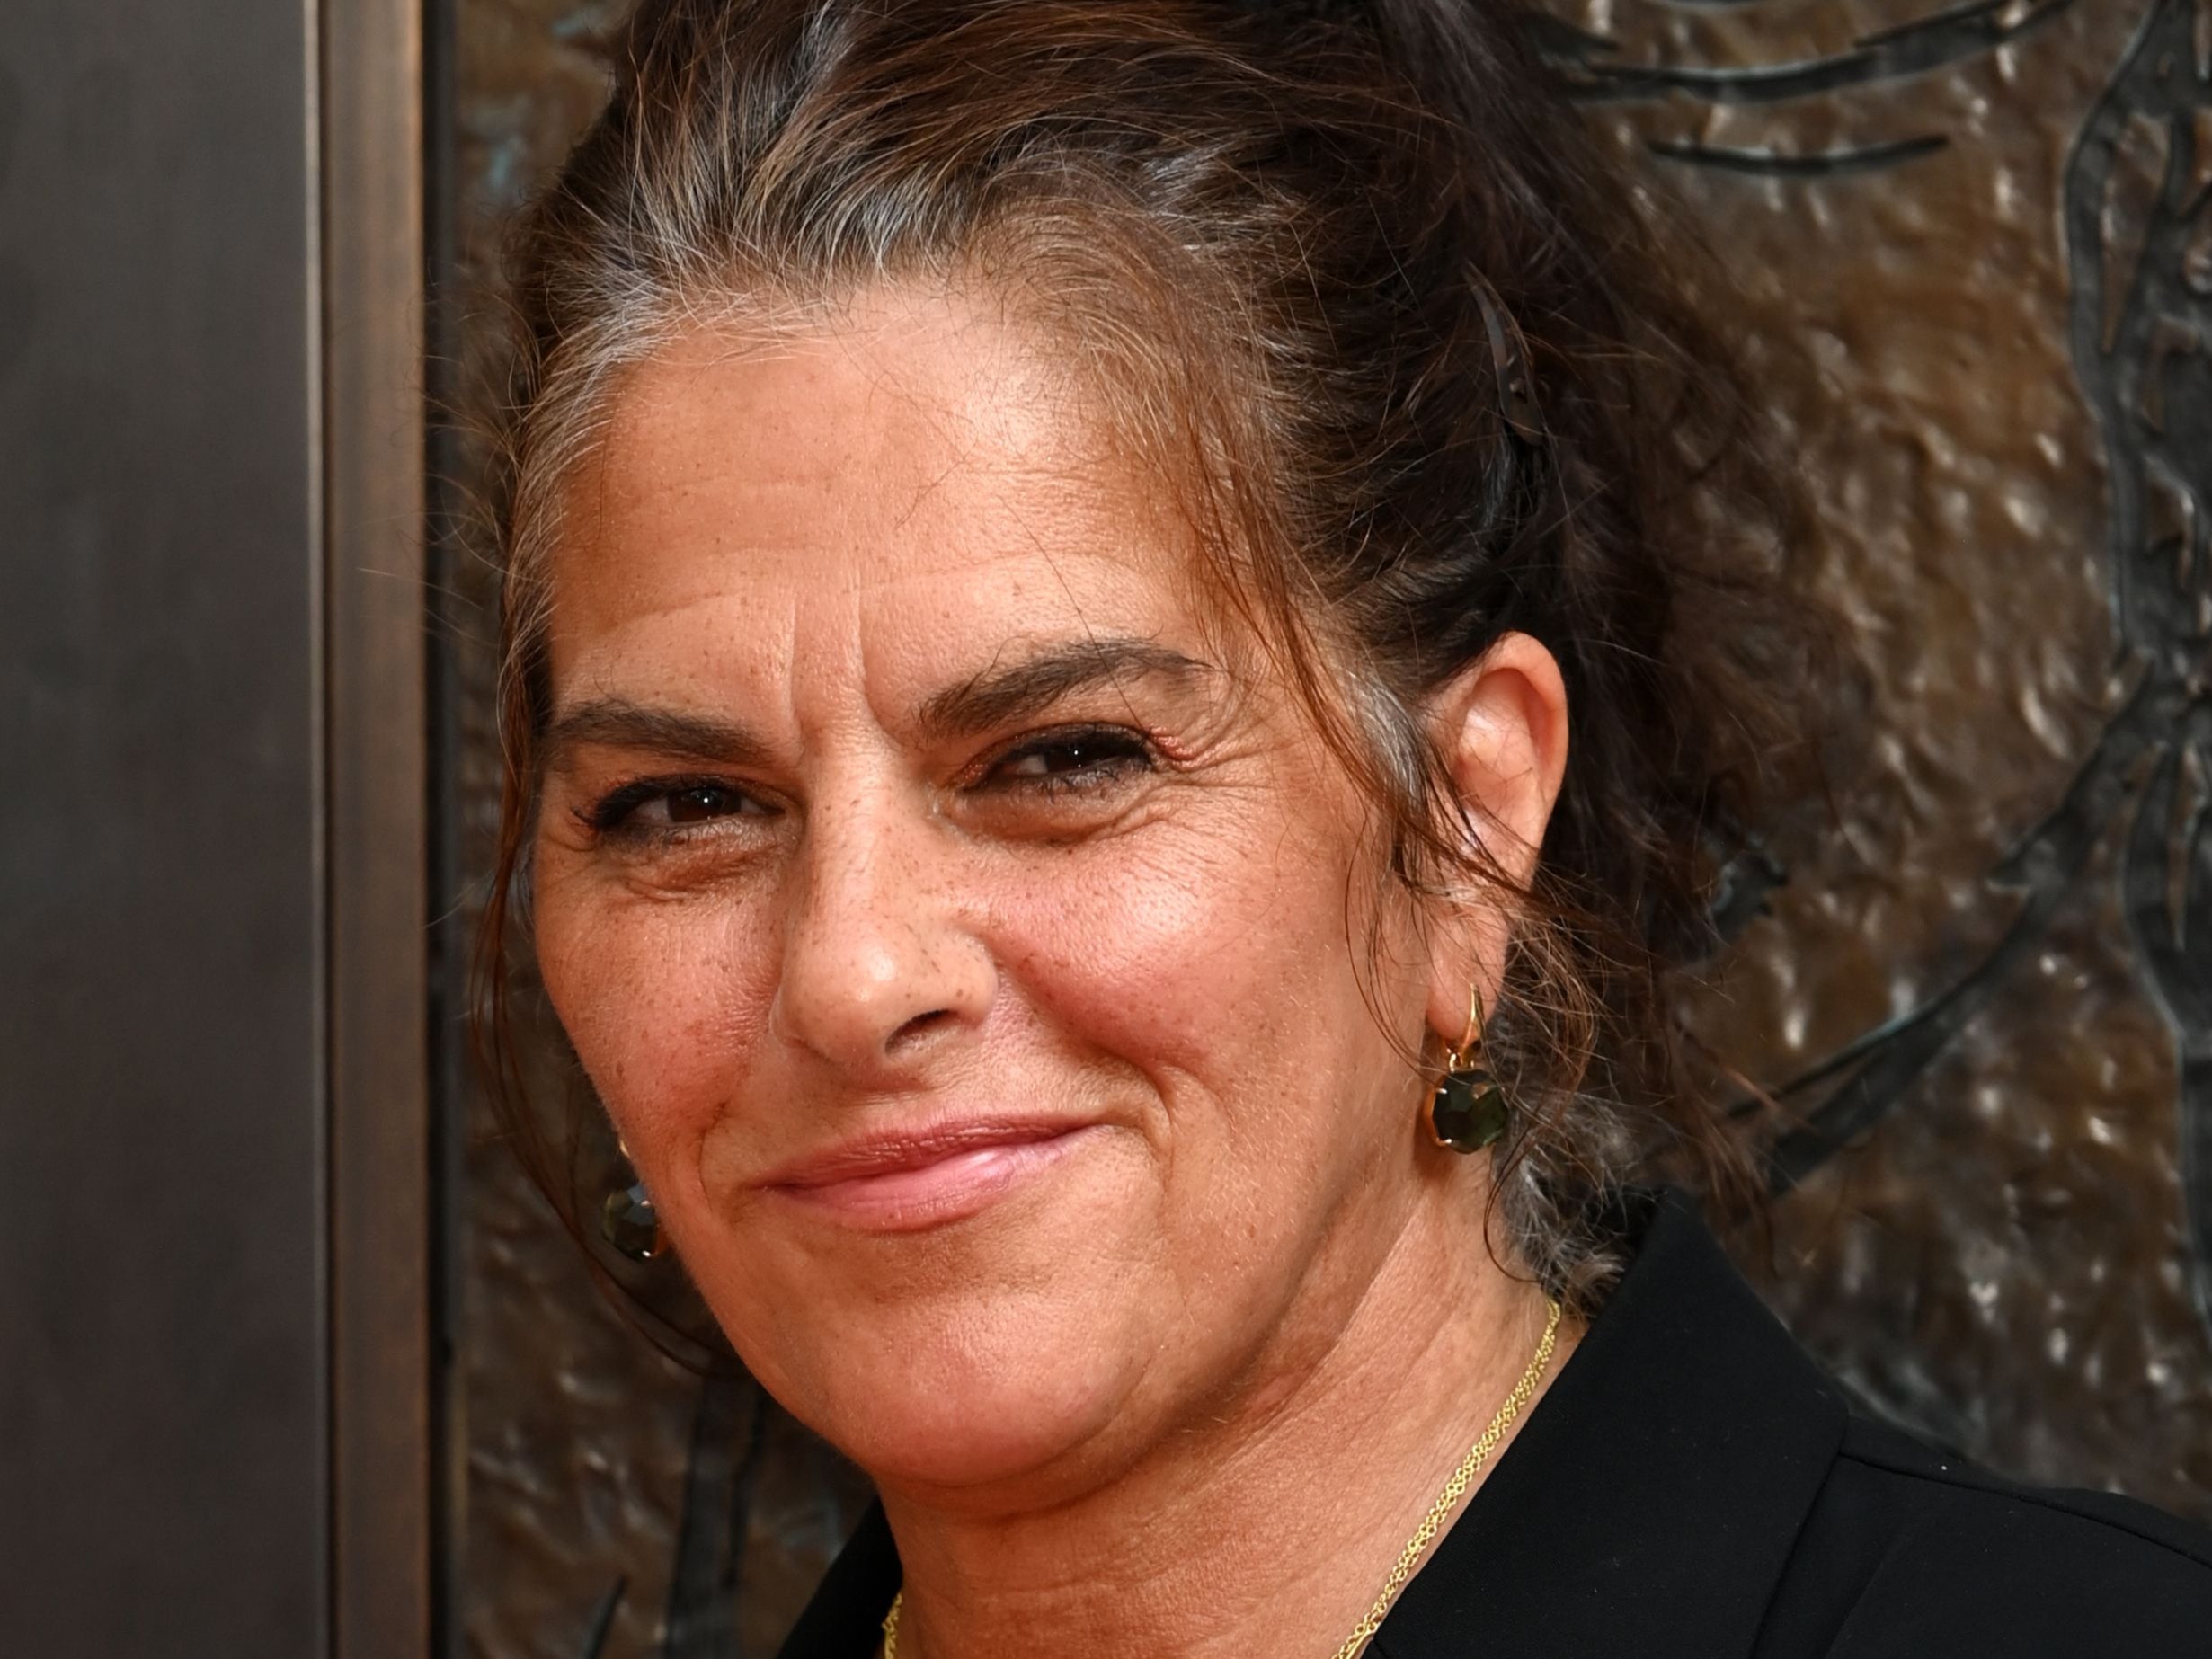 Artist Tracey Emin was also honored in the King's Birthday Honors List